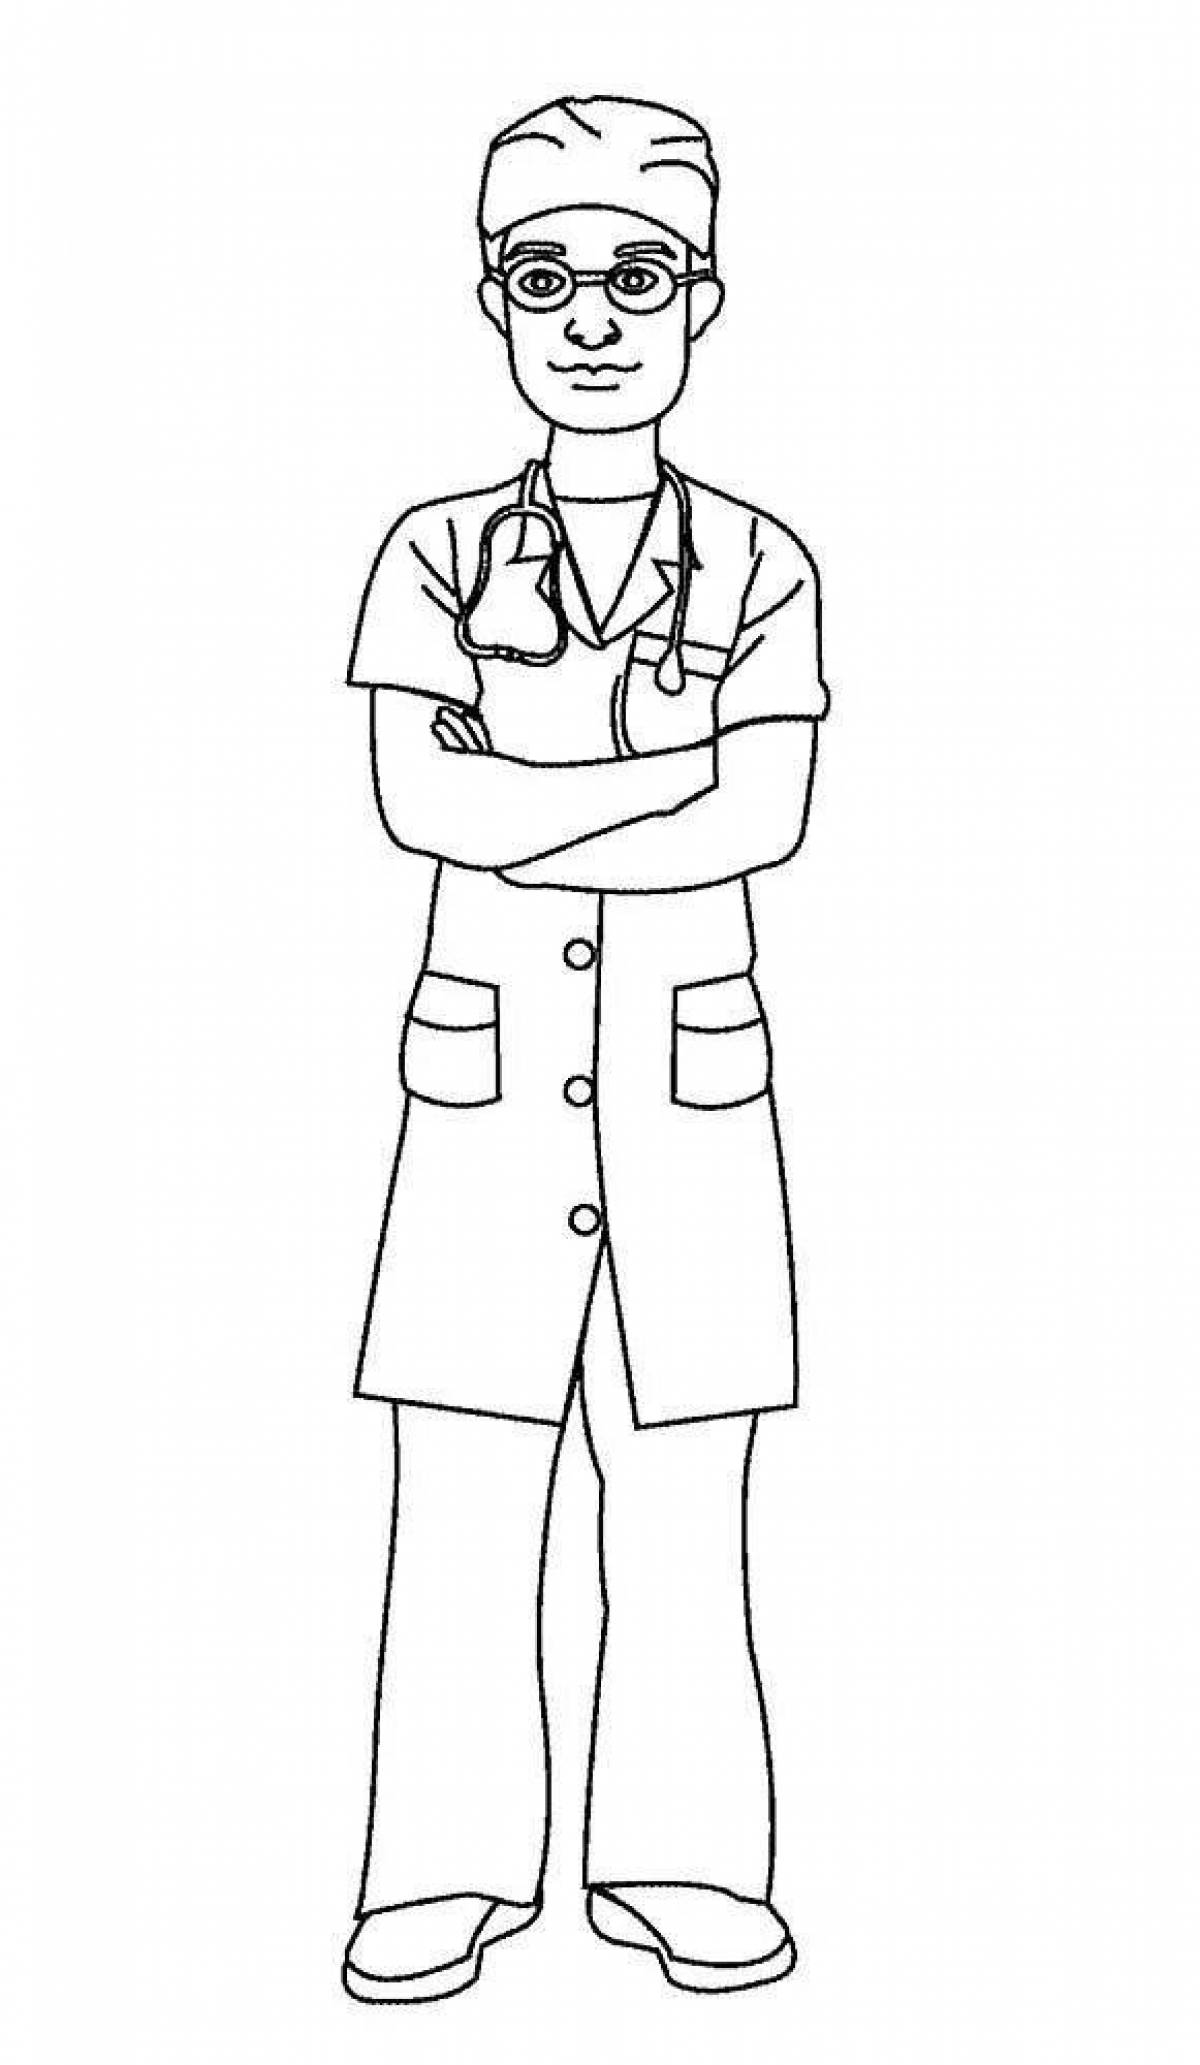 Adorable doctor figurine coloring page